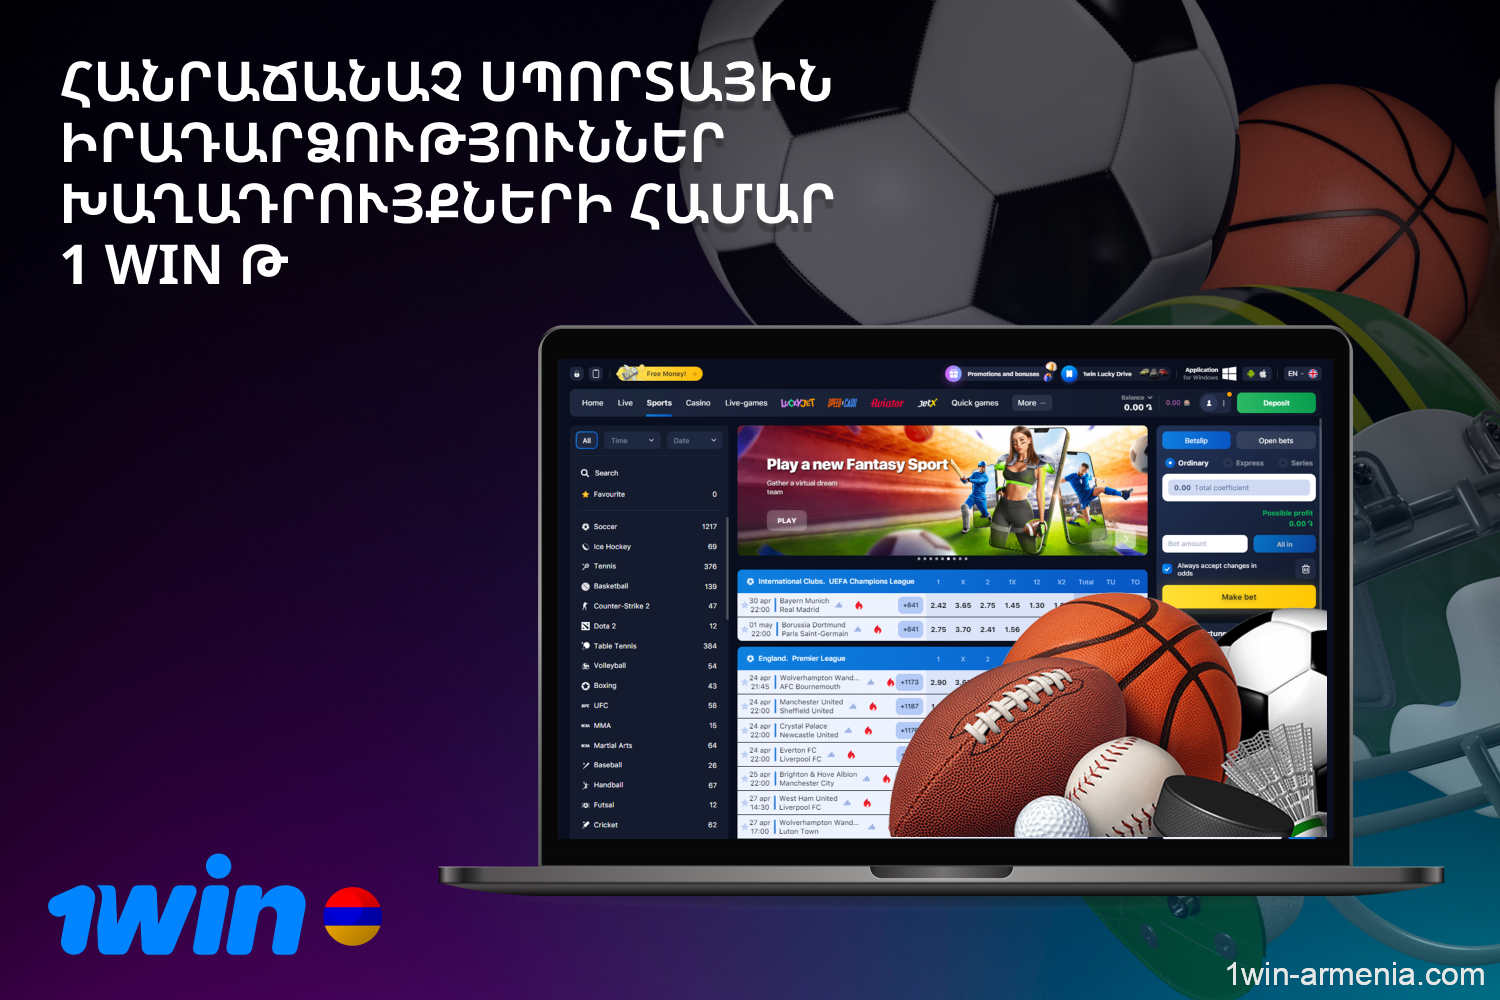 On the 1win site, users from Armenia will find a wide range of bets on popular sports events